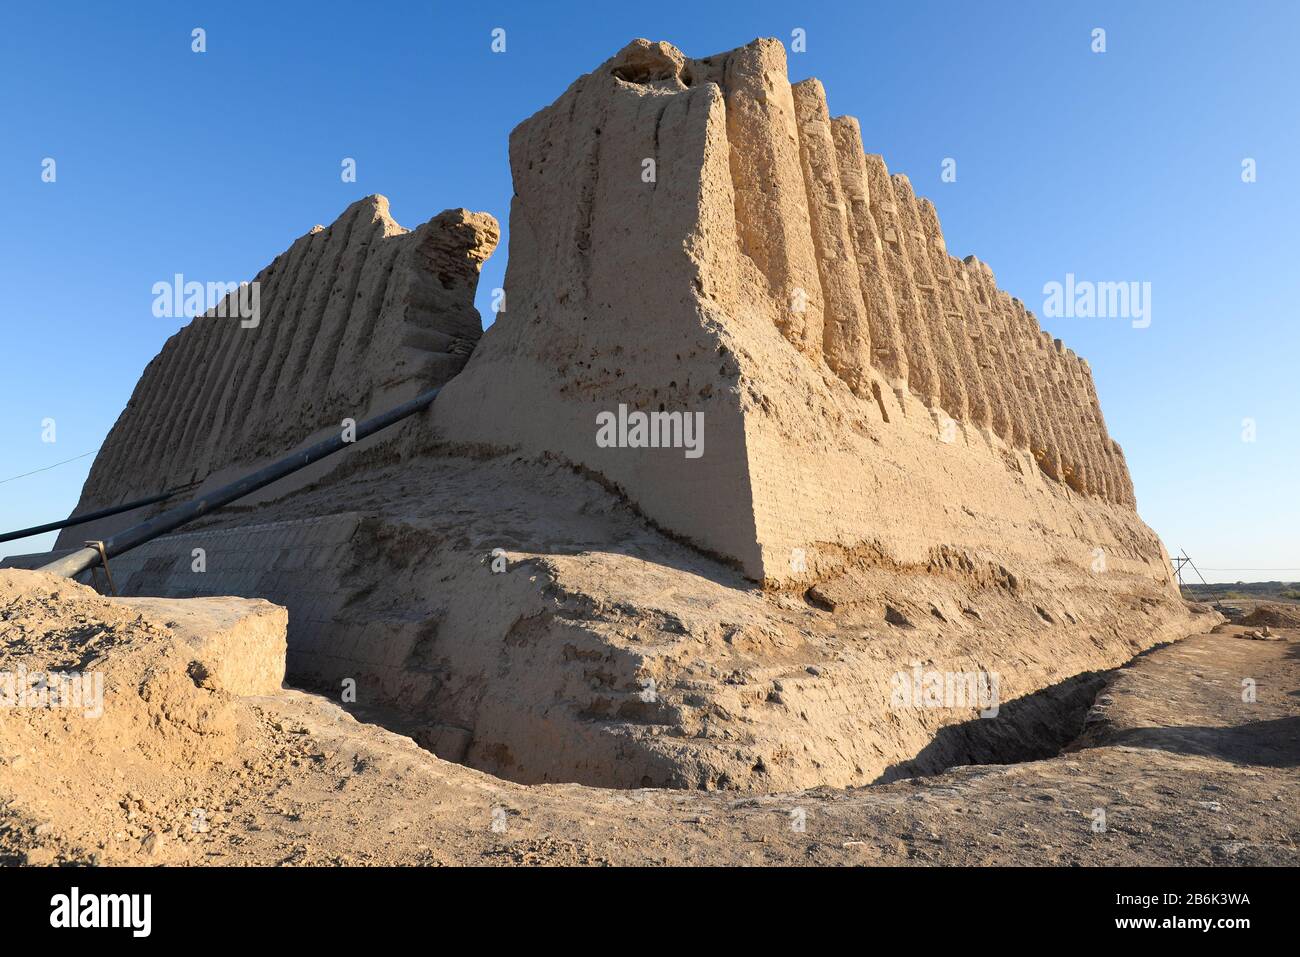 Angled view of Great Kyz Qala, also know as Kiz kala (Maiden’s Castle). Historical Site located in Ancient Merv in Turkmenistan near the city of Mary. Stock Photo